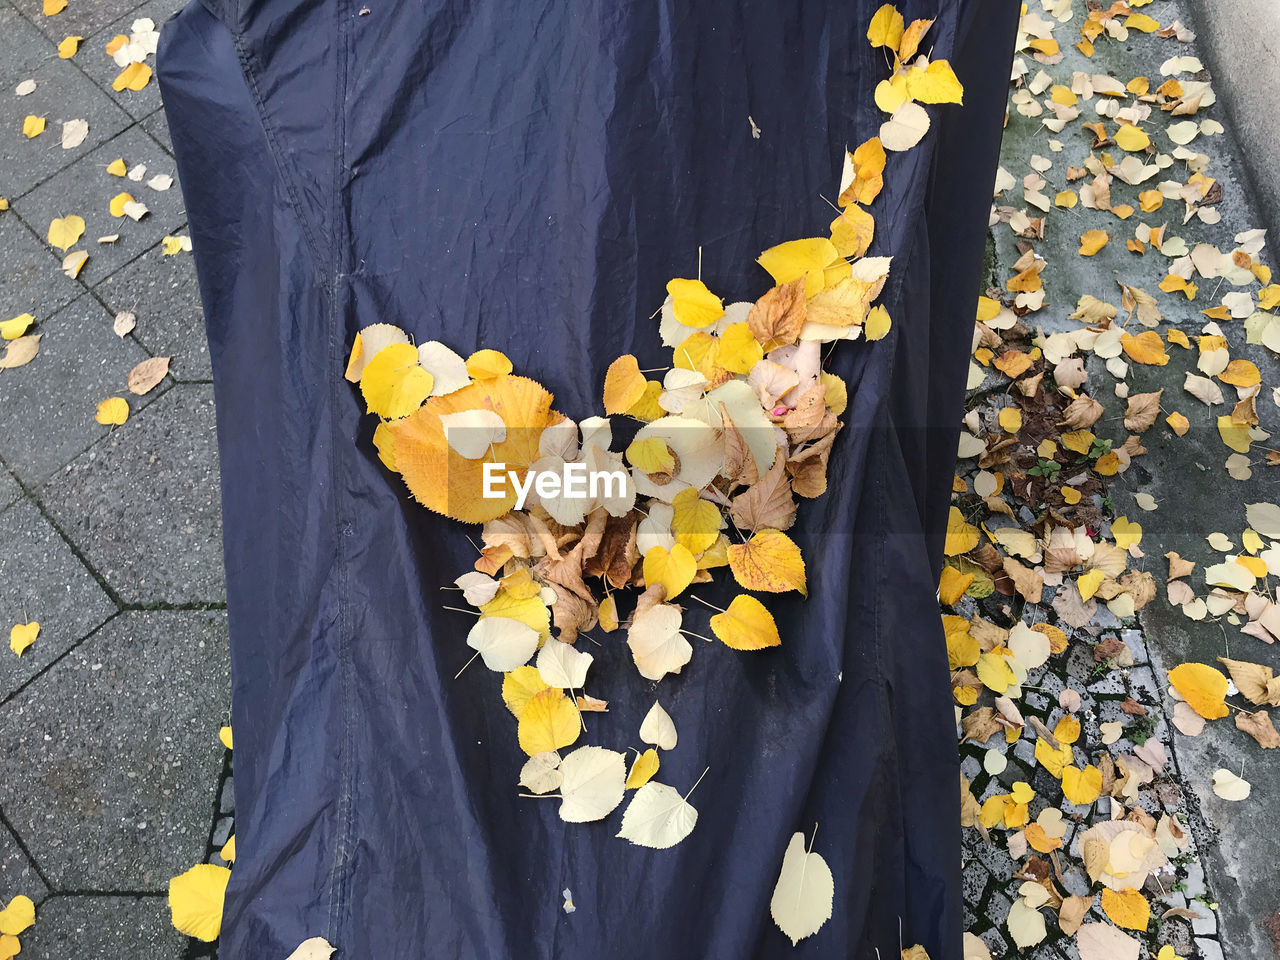 LOW SECTION OF PERSON STANDING ON YELLOW LEAVES